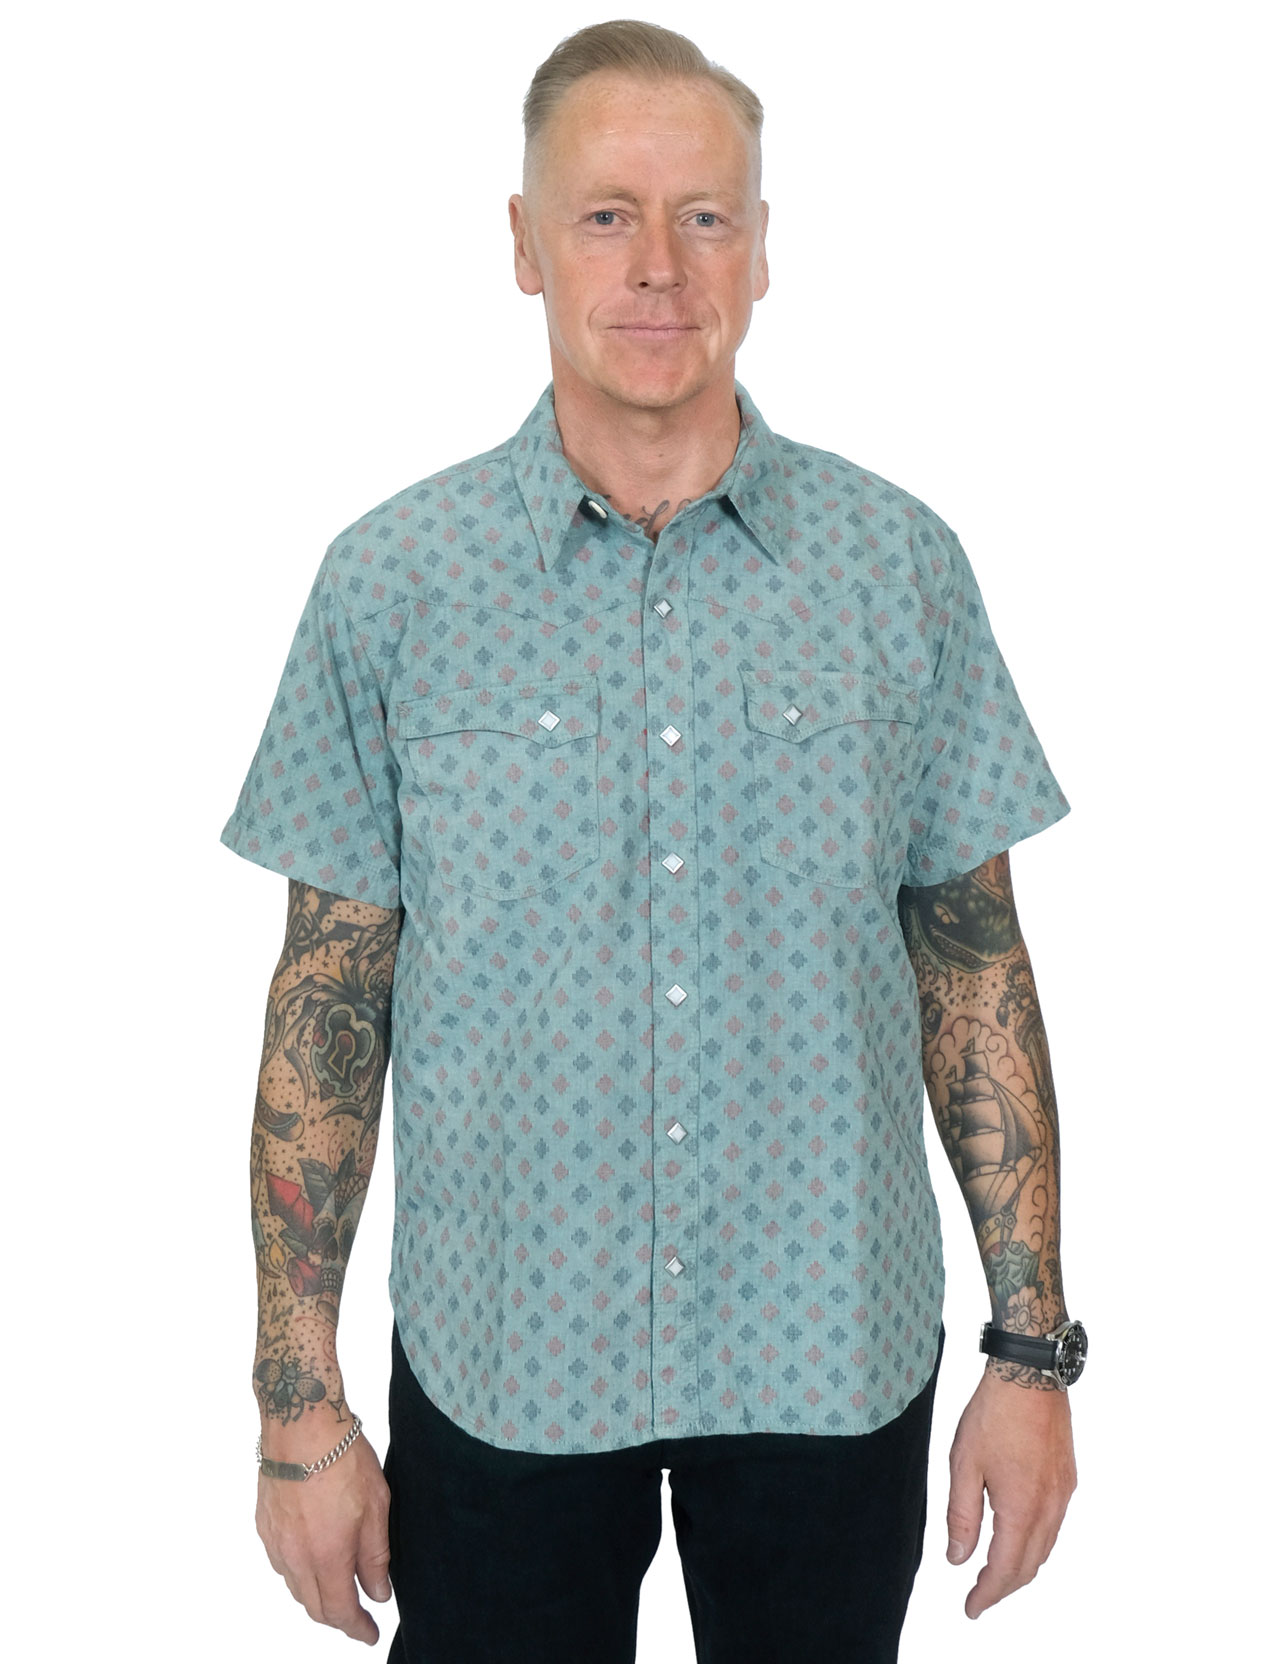 Freenote-Cloth---Calico-Western-Shirt-S-S---Turquoise991